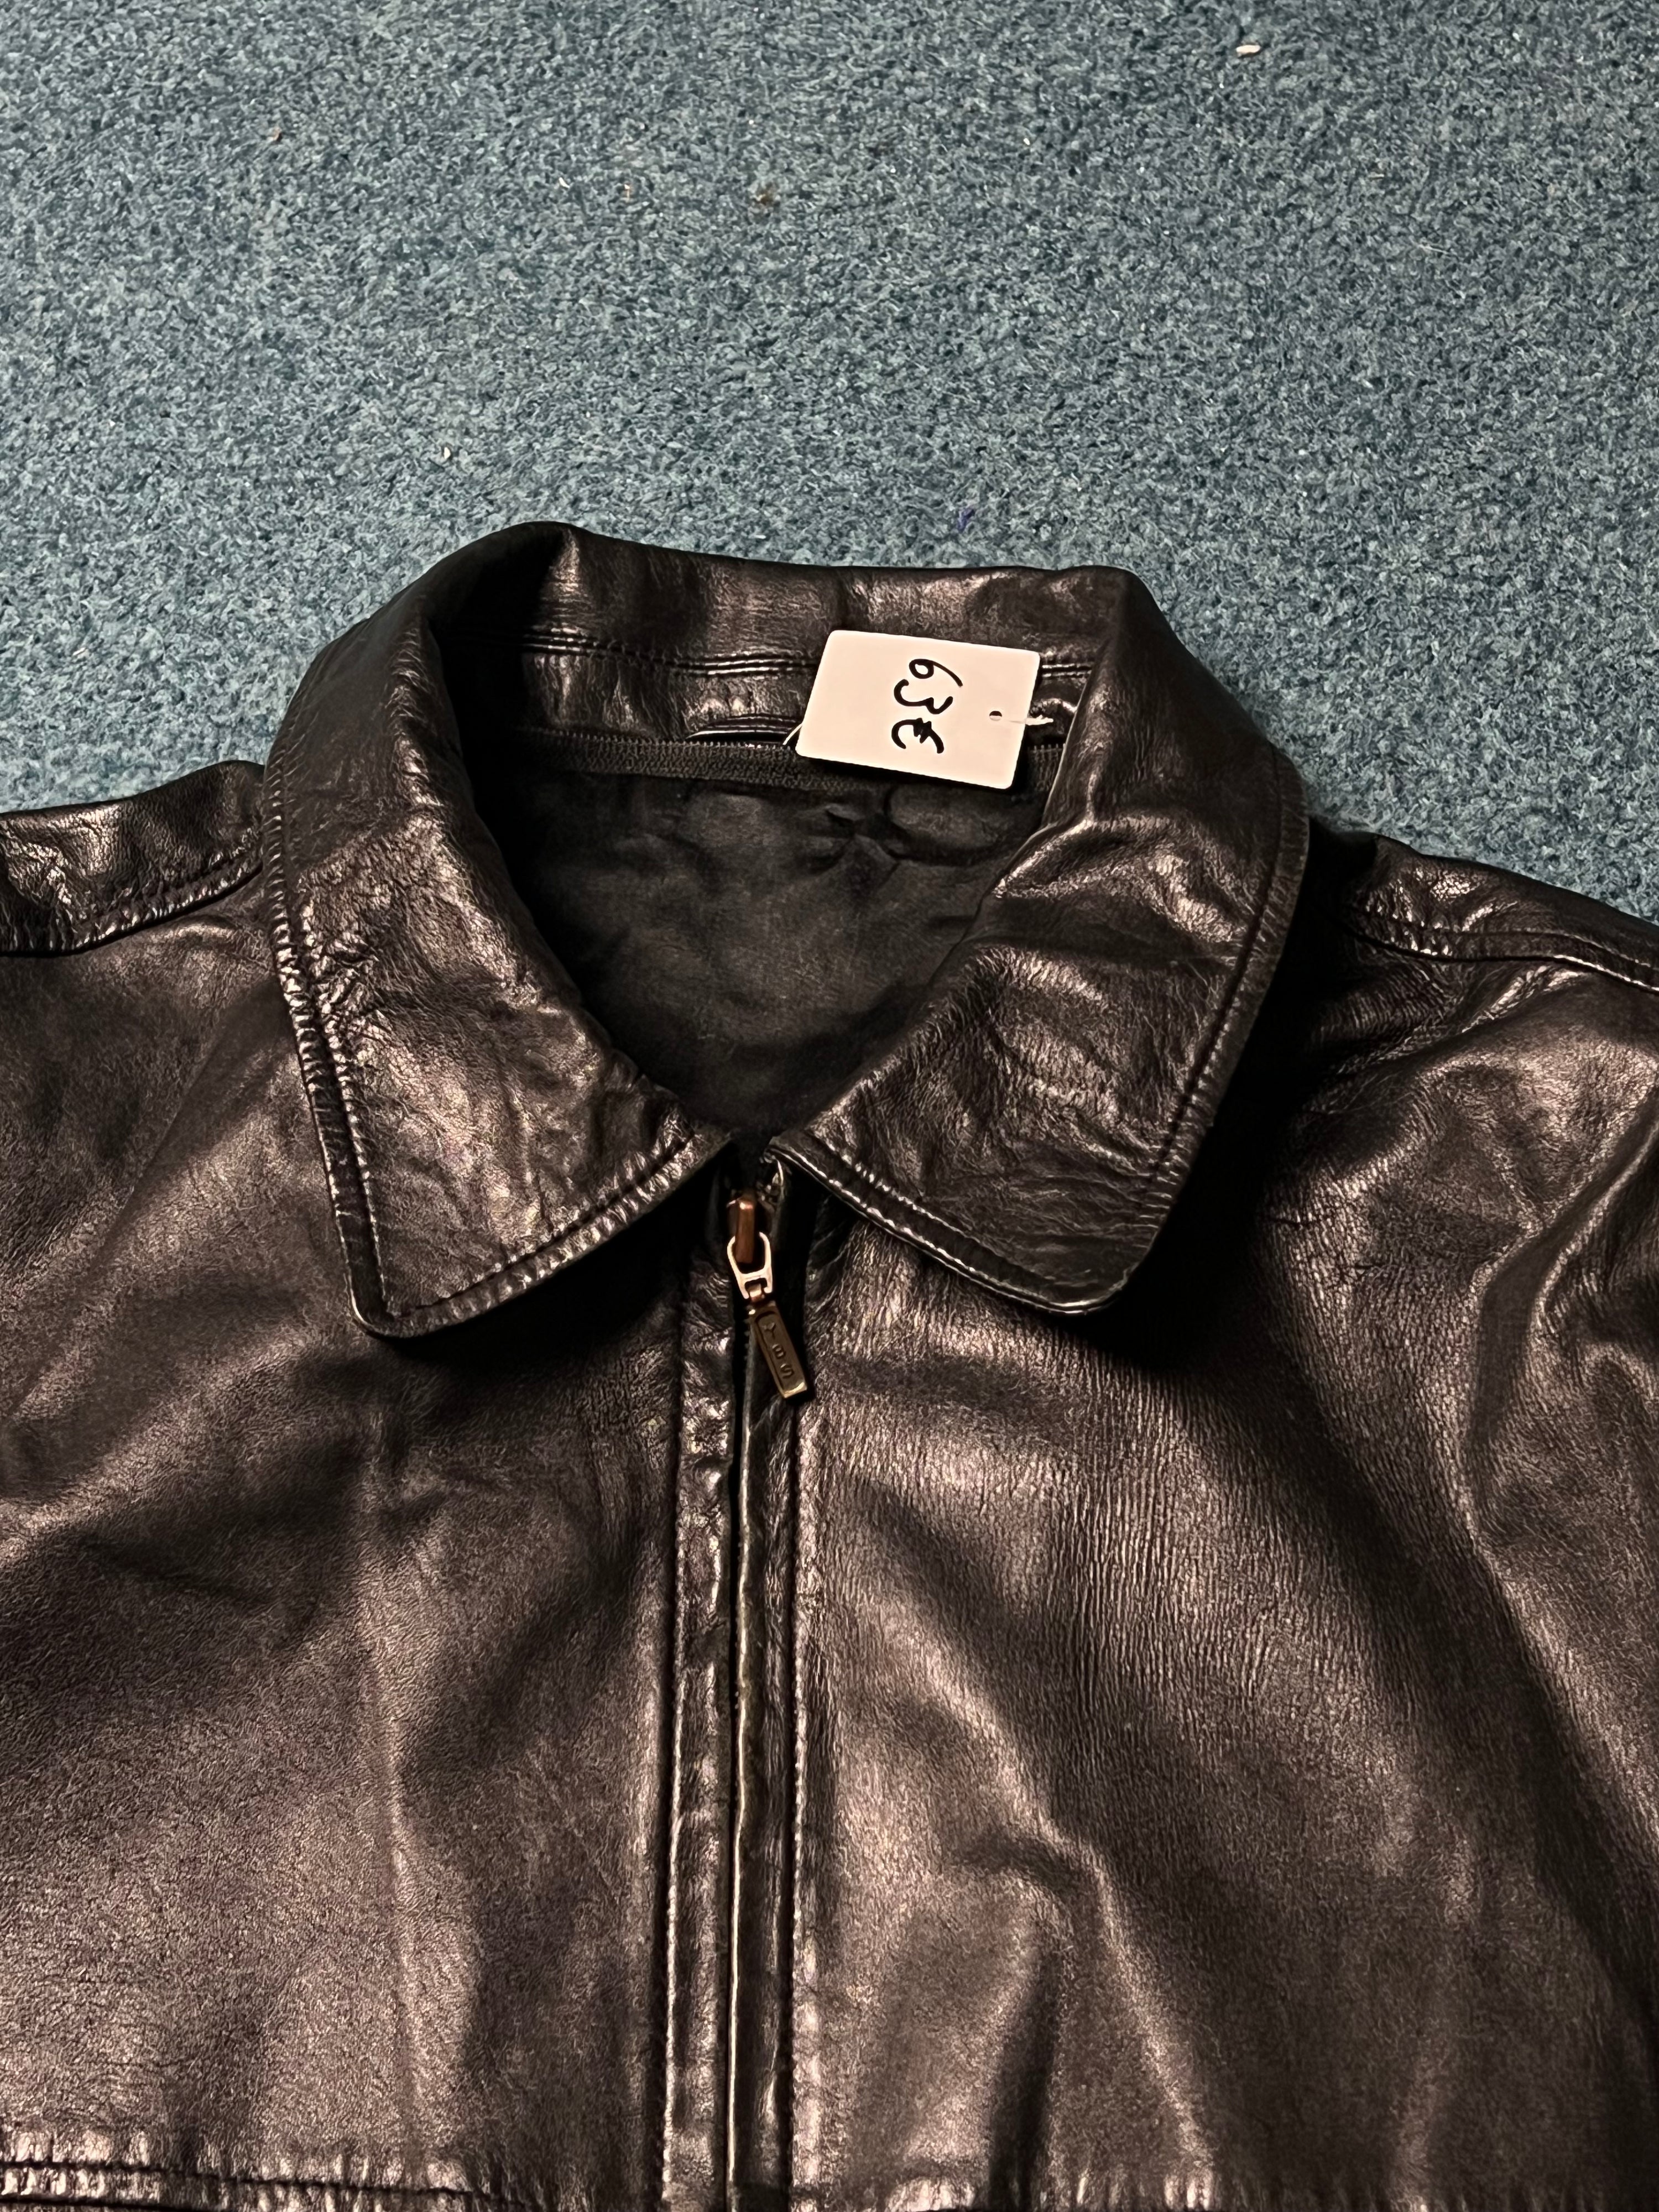 Vintage 90s classic soft Leather aged Jacket (L)